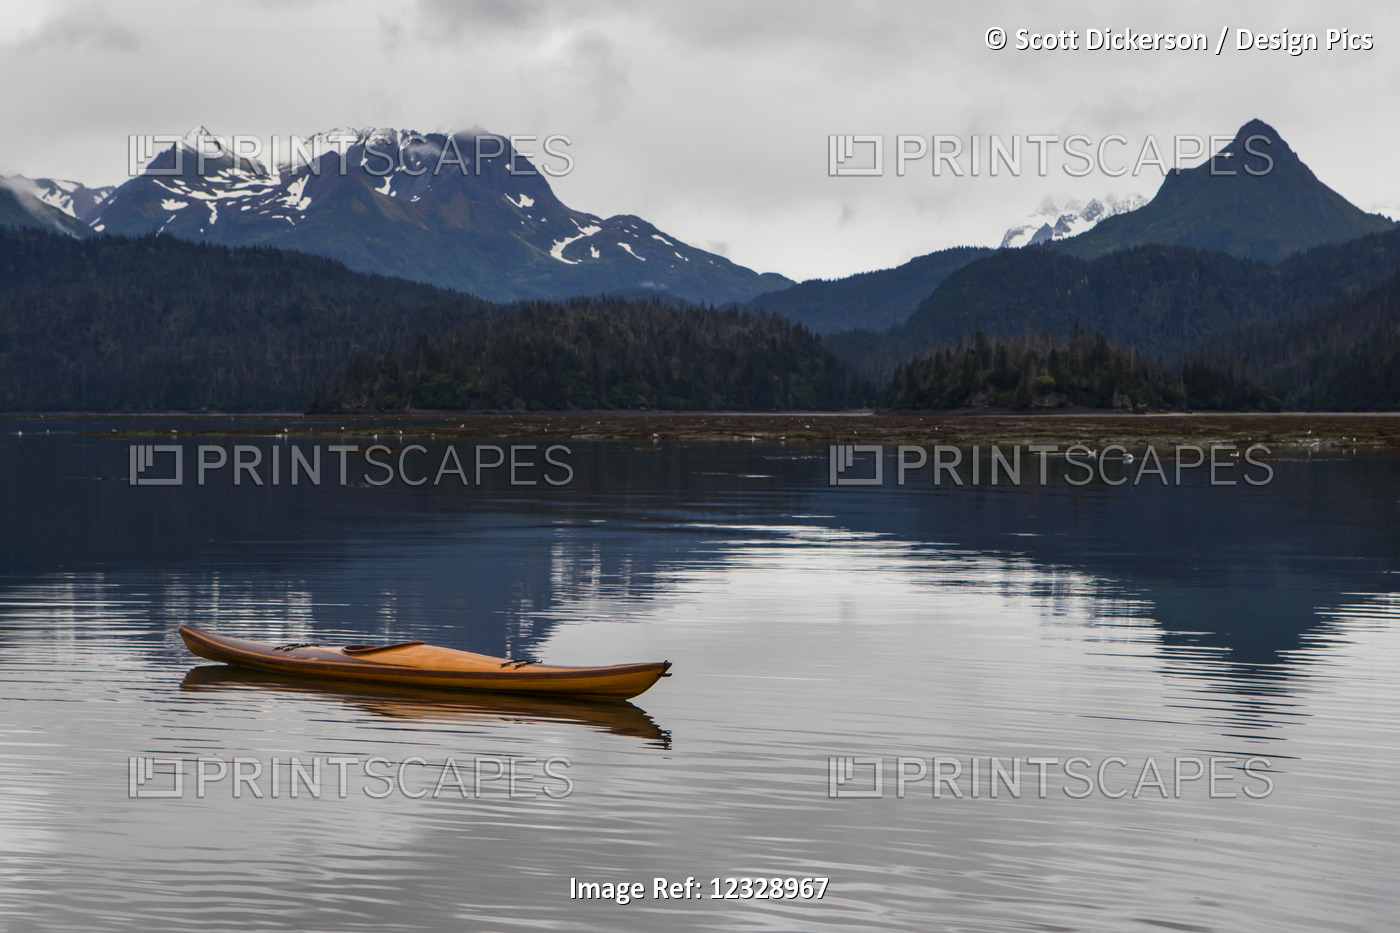 A Kayak Sits On The Tranquil Water With A View Of Forests And A Mountain Range ...